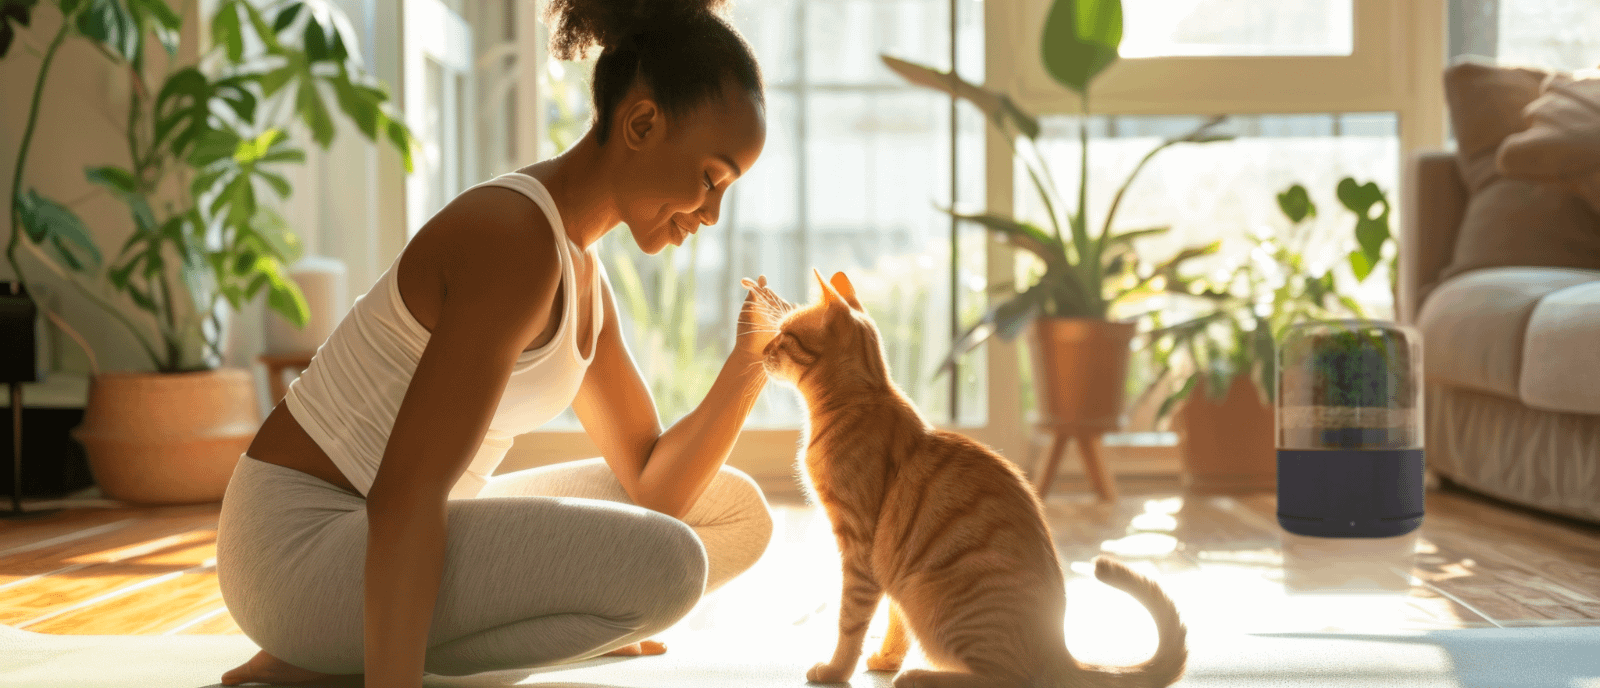 Woman petting a cat on a yoga mat, plants and Briiv air purifier are in the background